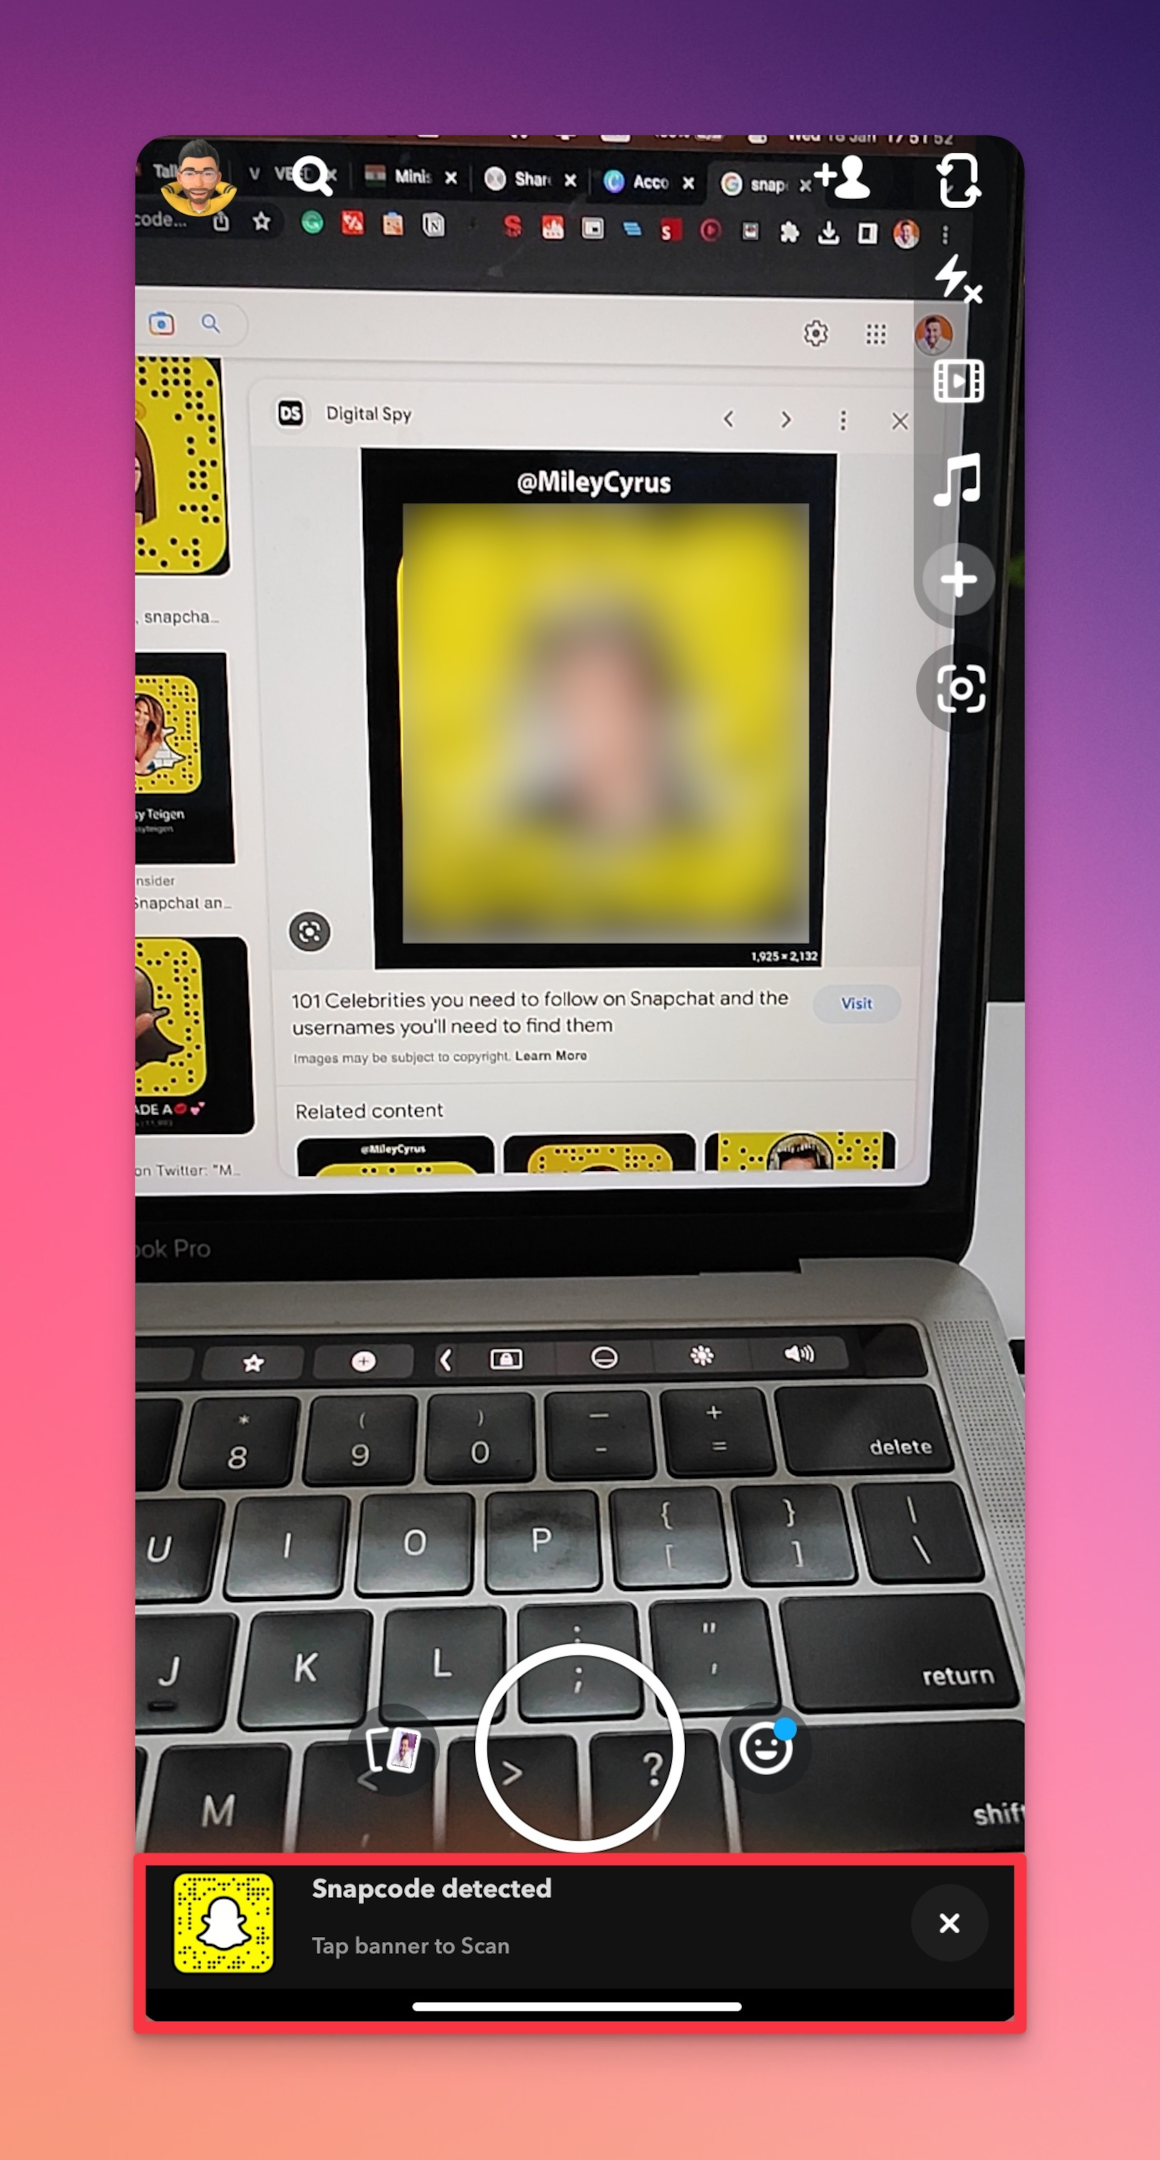 Remote.tools shows how to add friends using Snapcode (QR code)